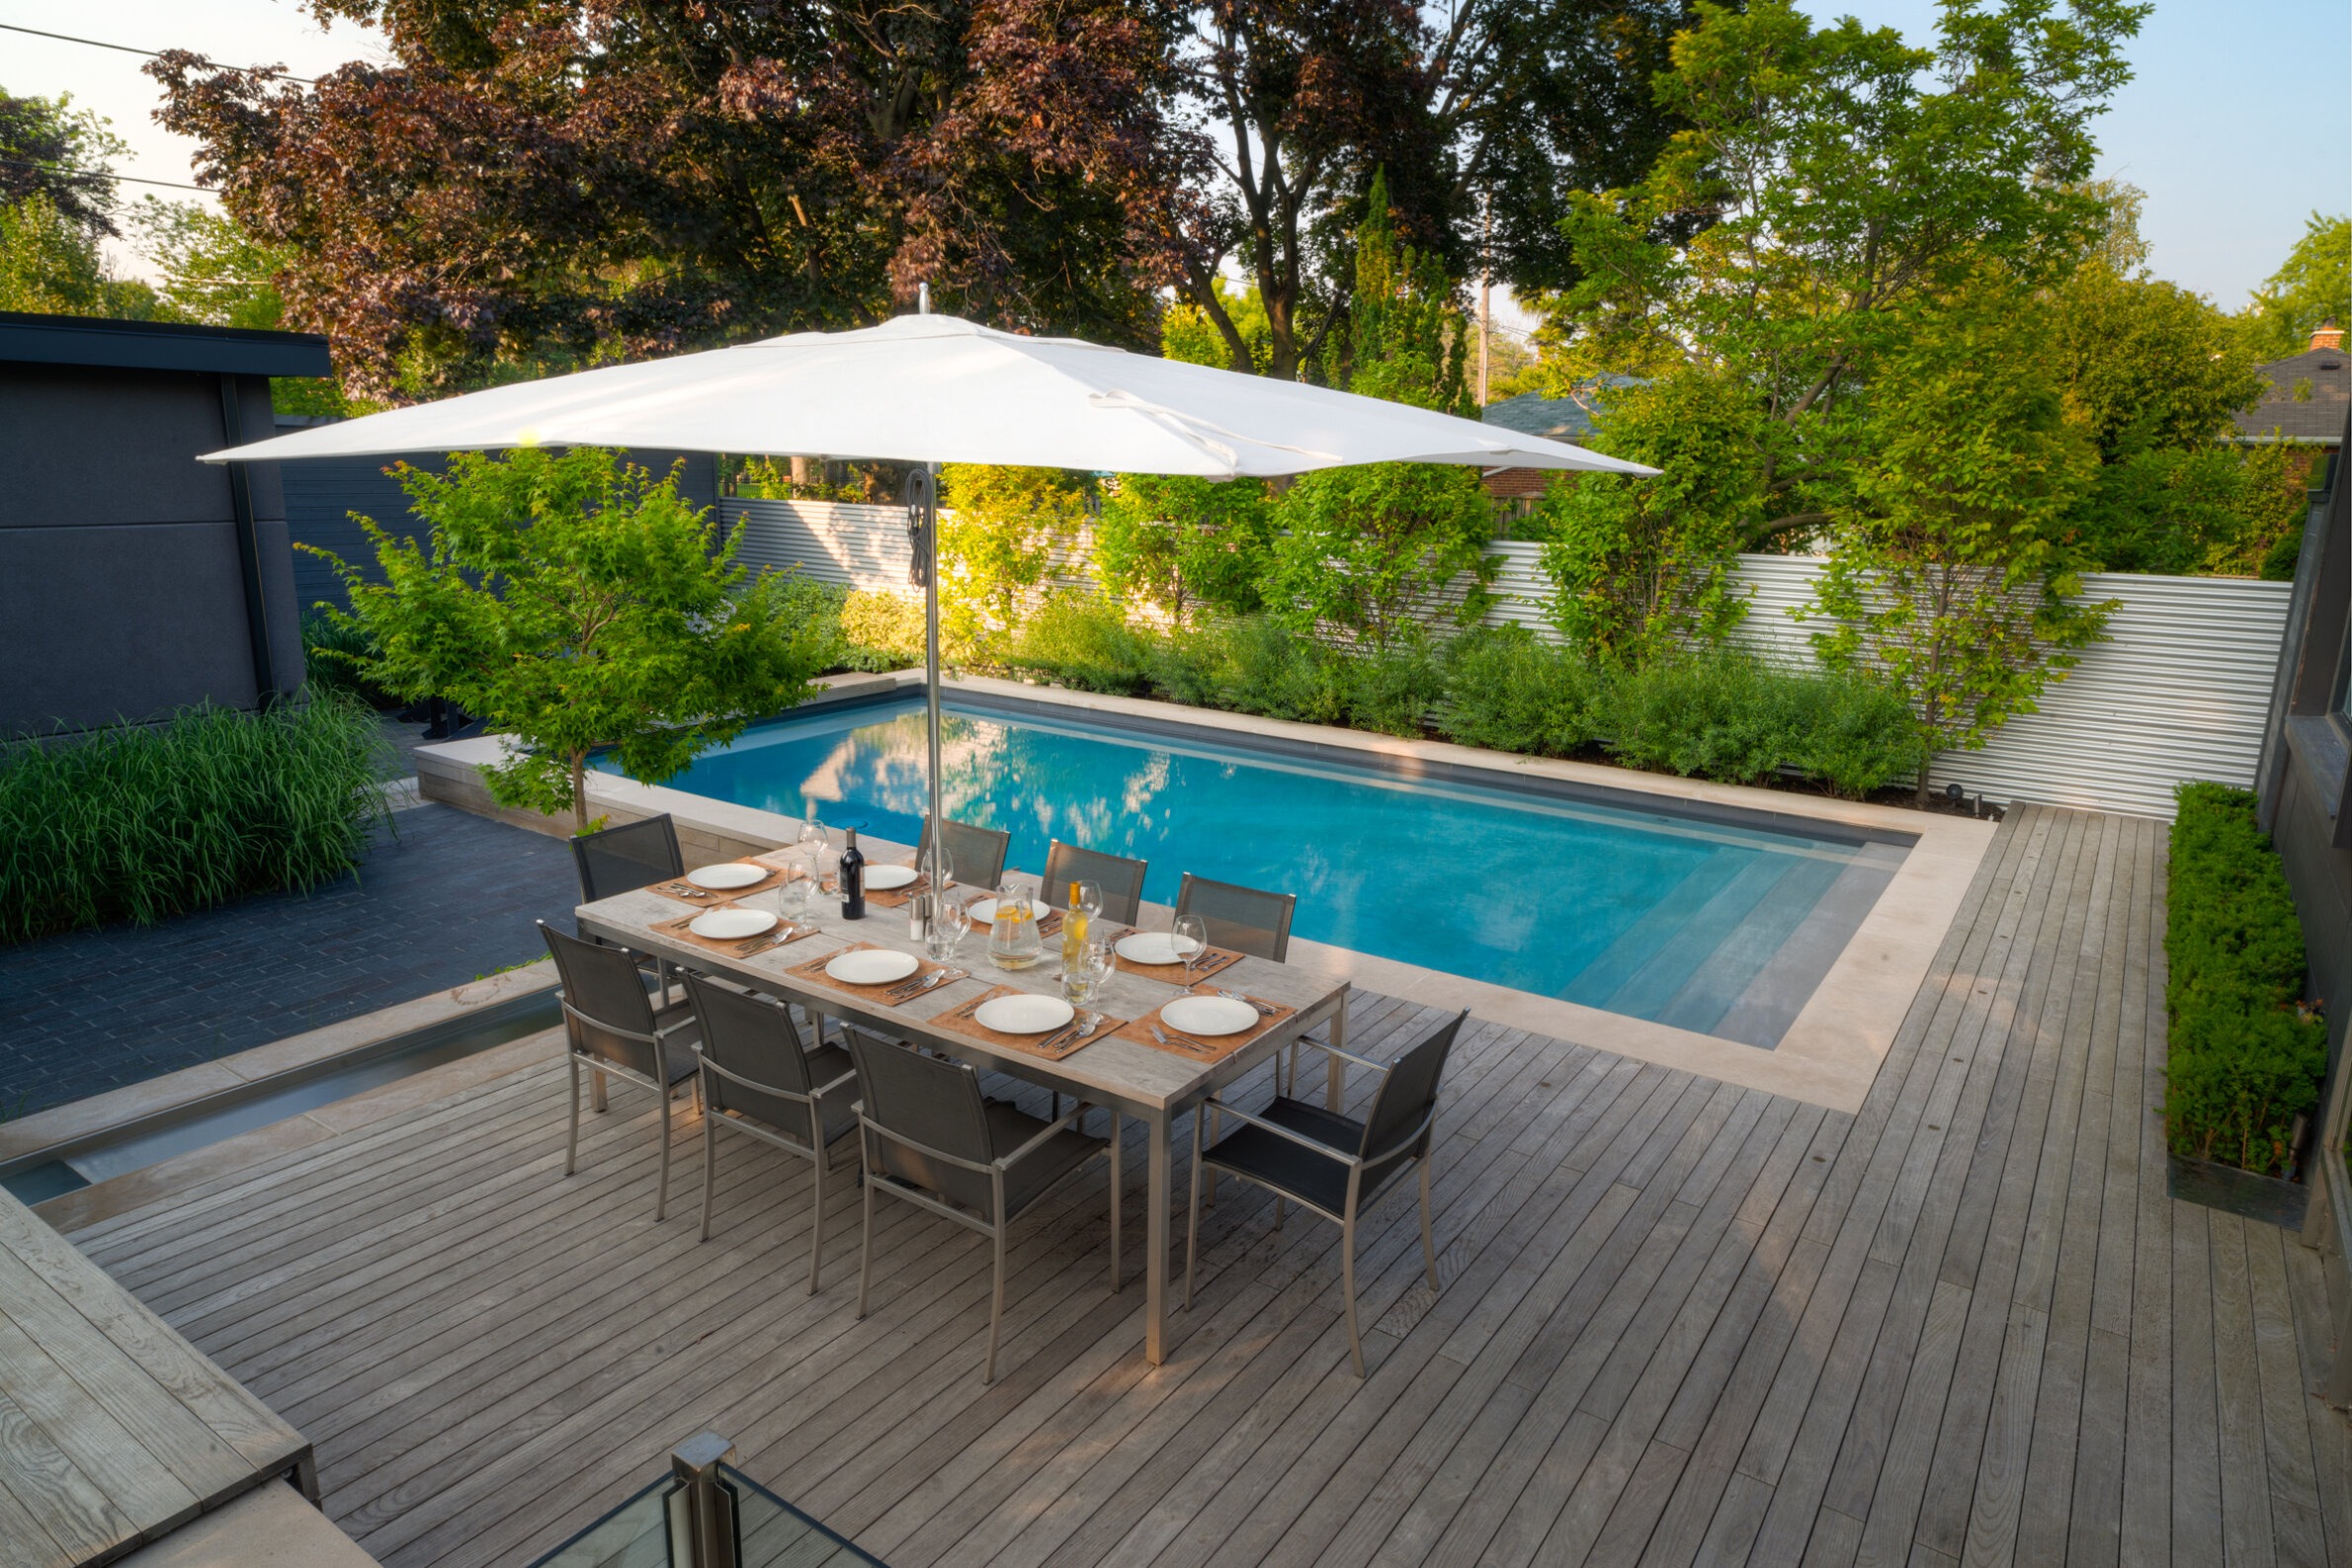 A serene outdoor setting with a dining table set for a meal under a white umbrella, wooden decking, and a rectangular swimming pool surrounded by greenery.